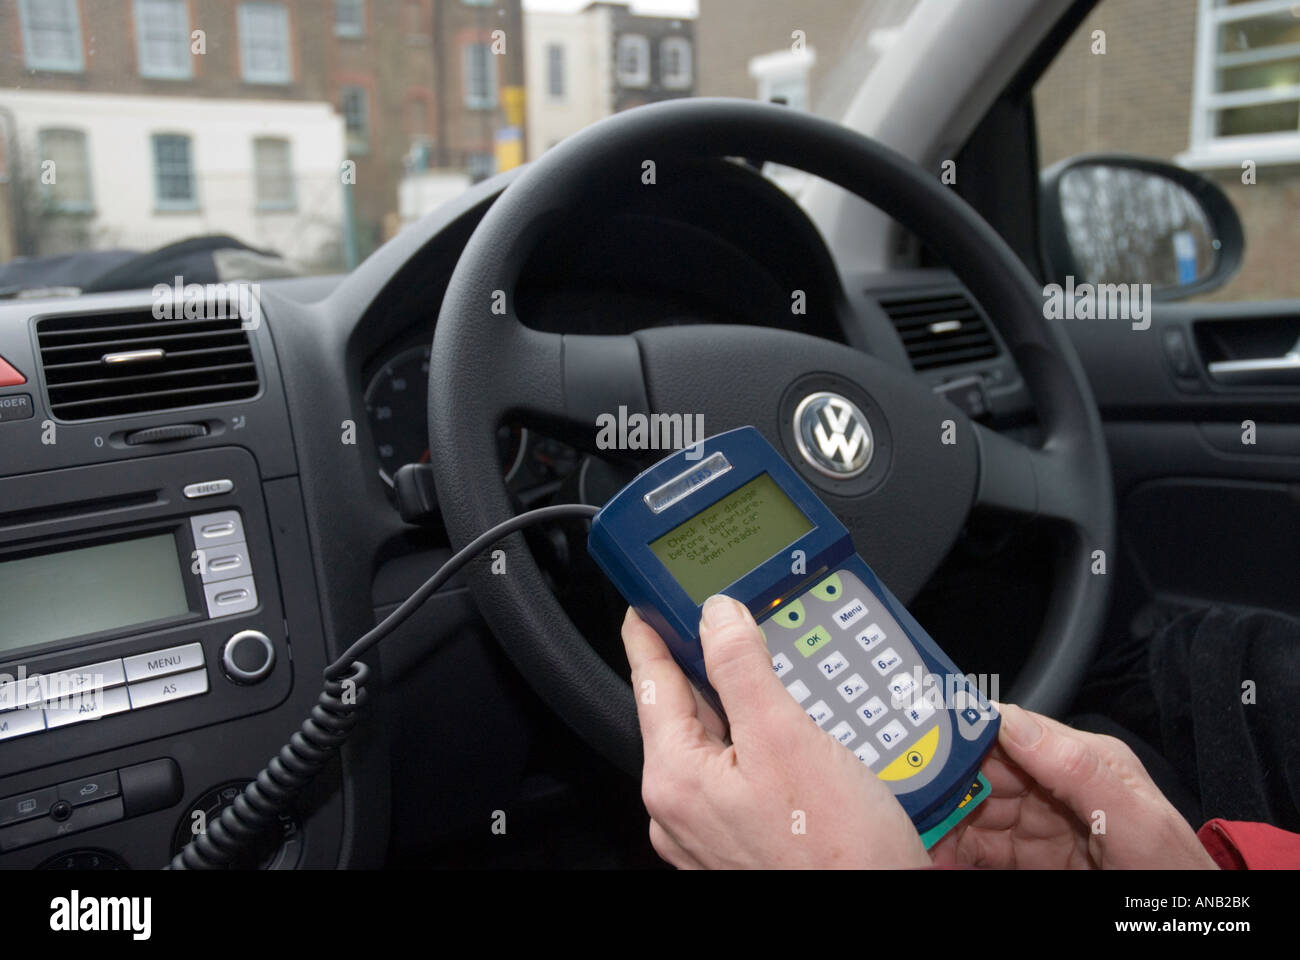 Handheld keypad allowing ignition of shared car Streetcar Stock Photo